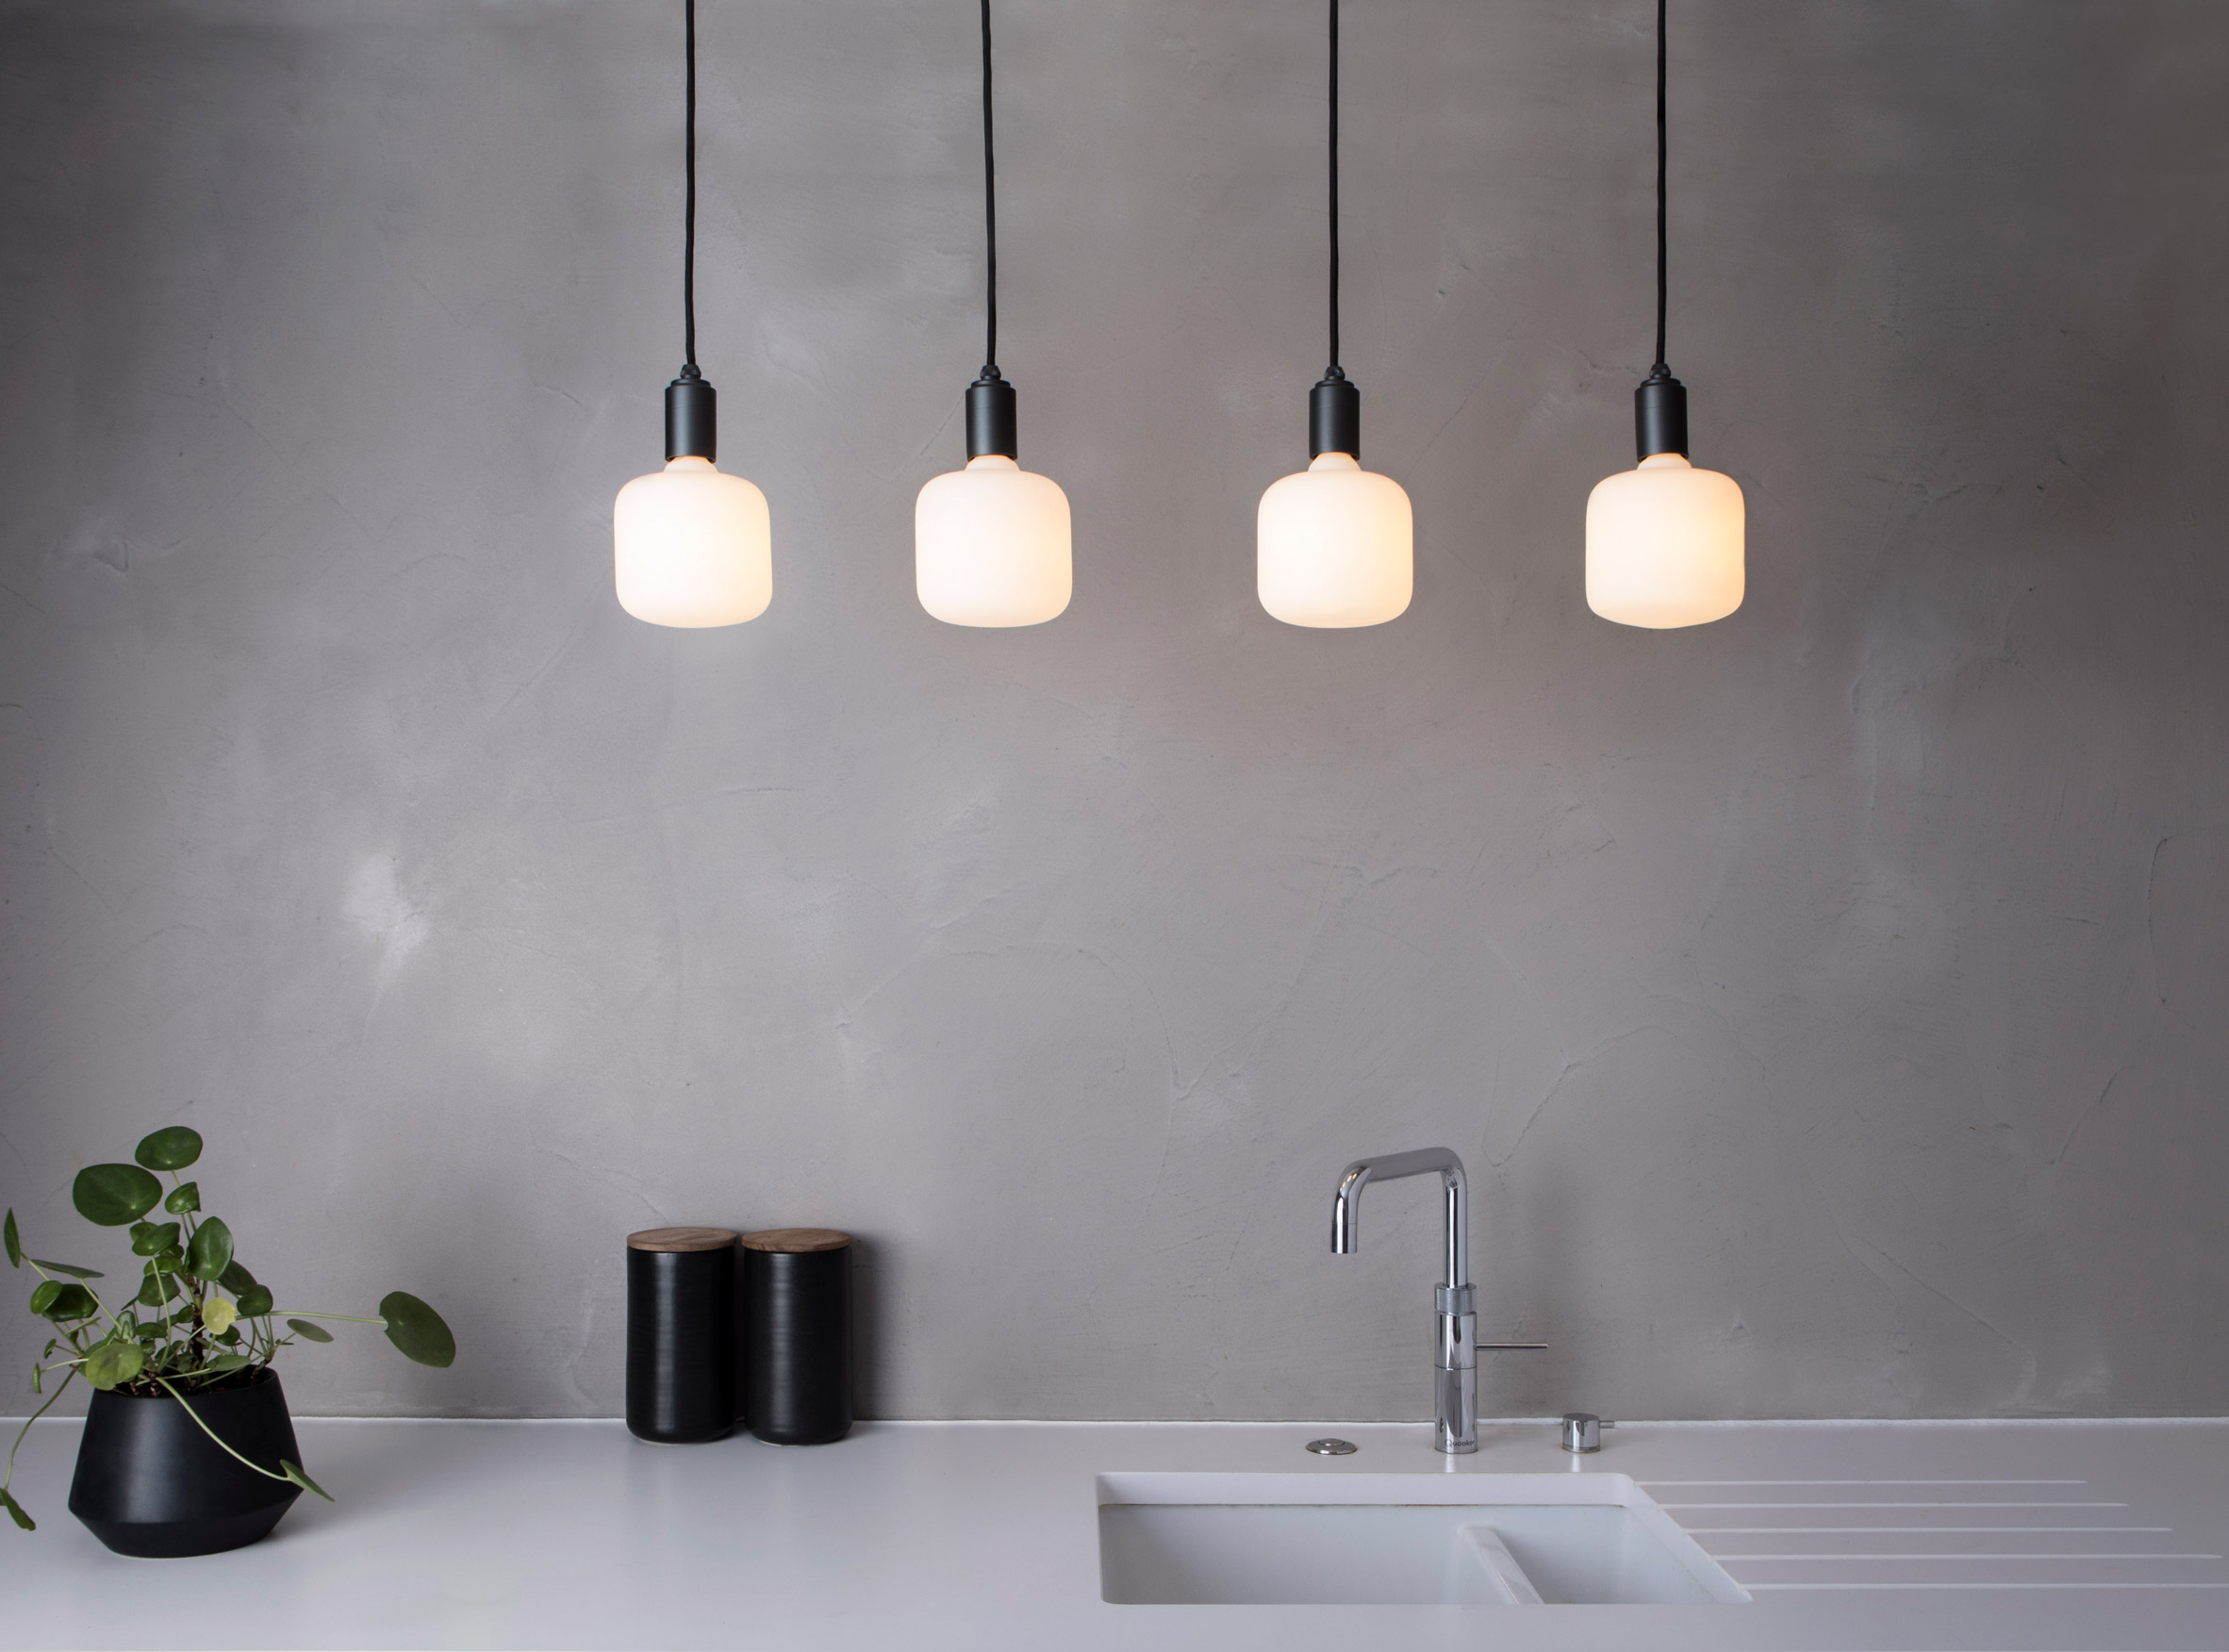 Porcelain Collection lighting by Tala